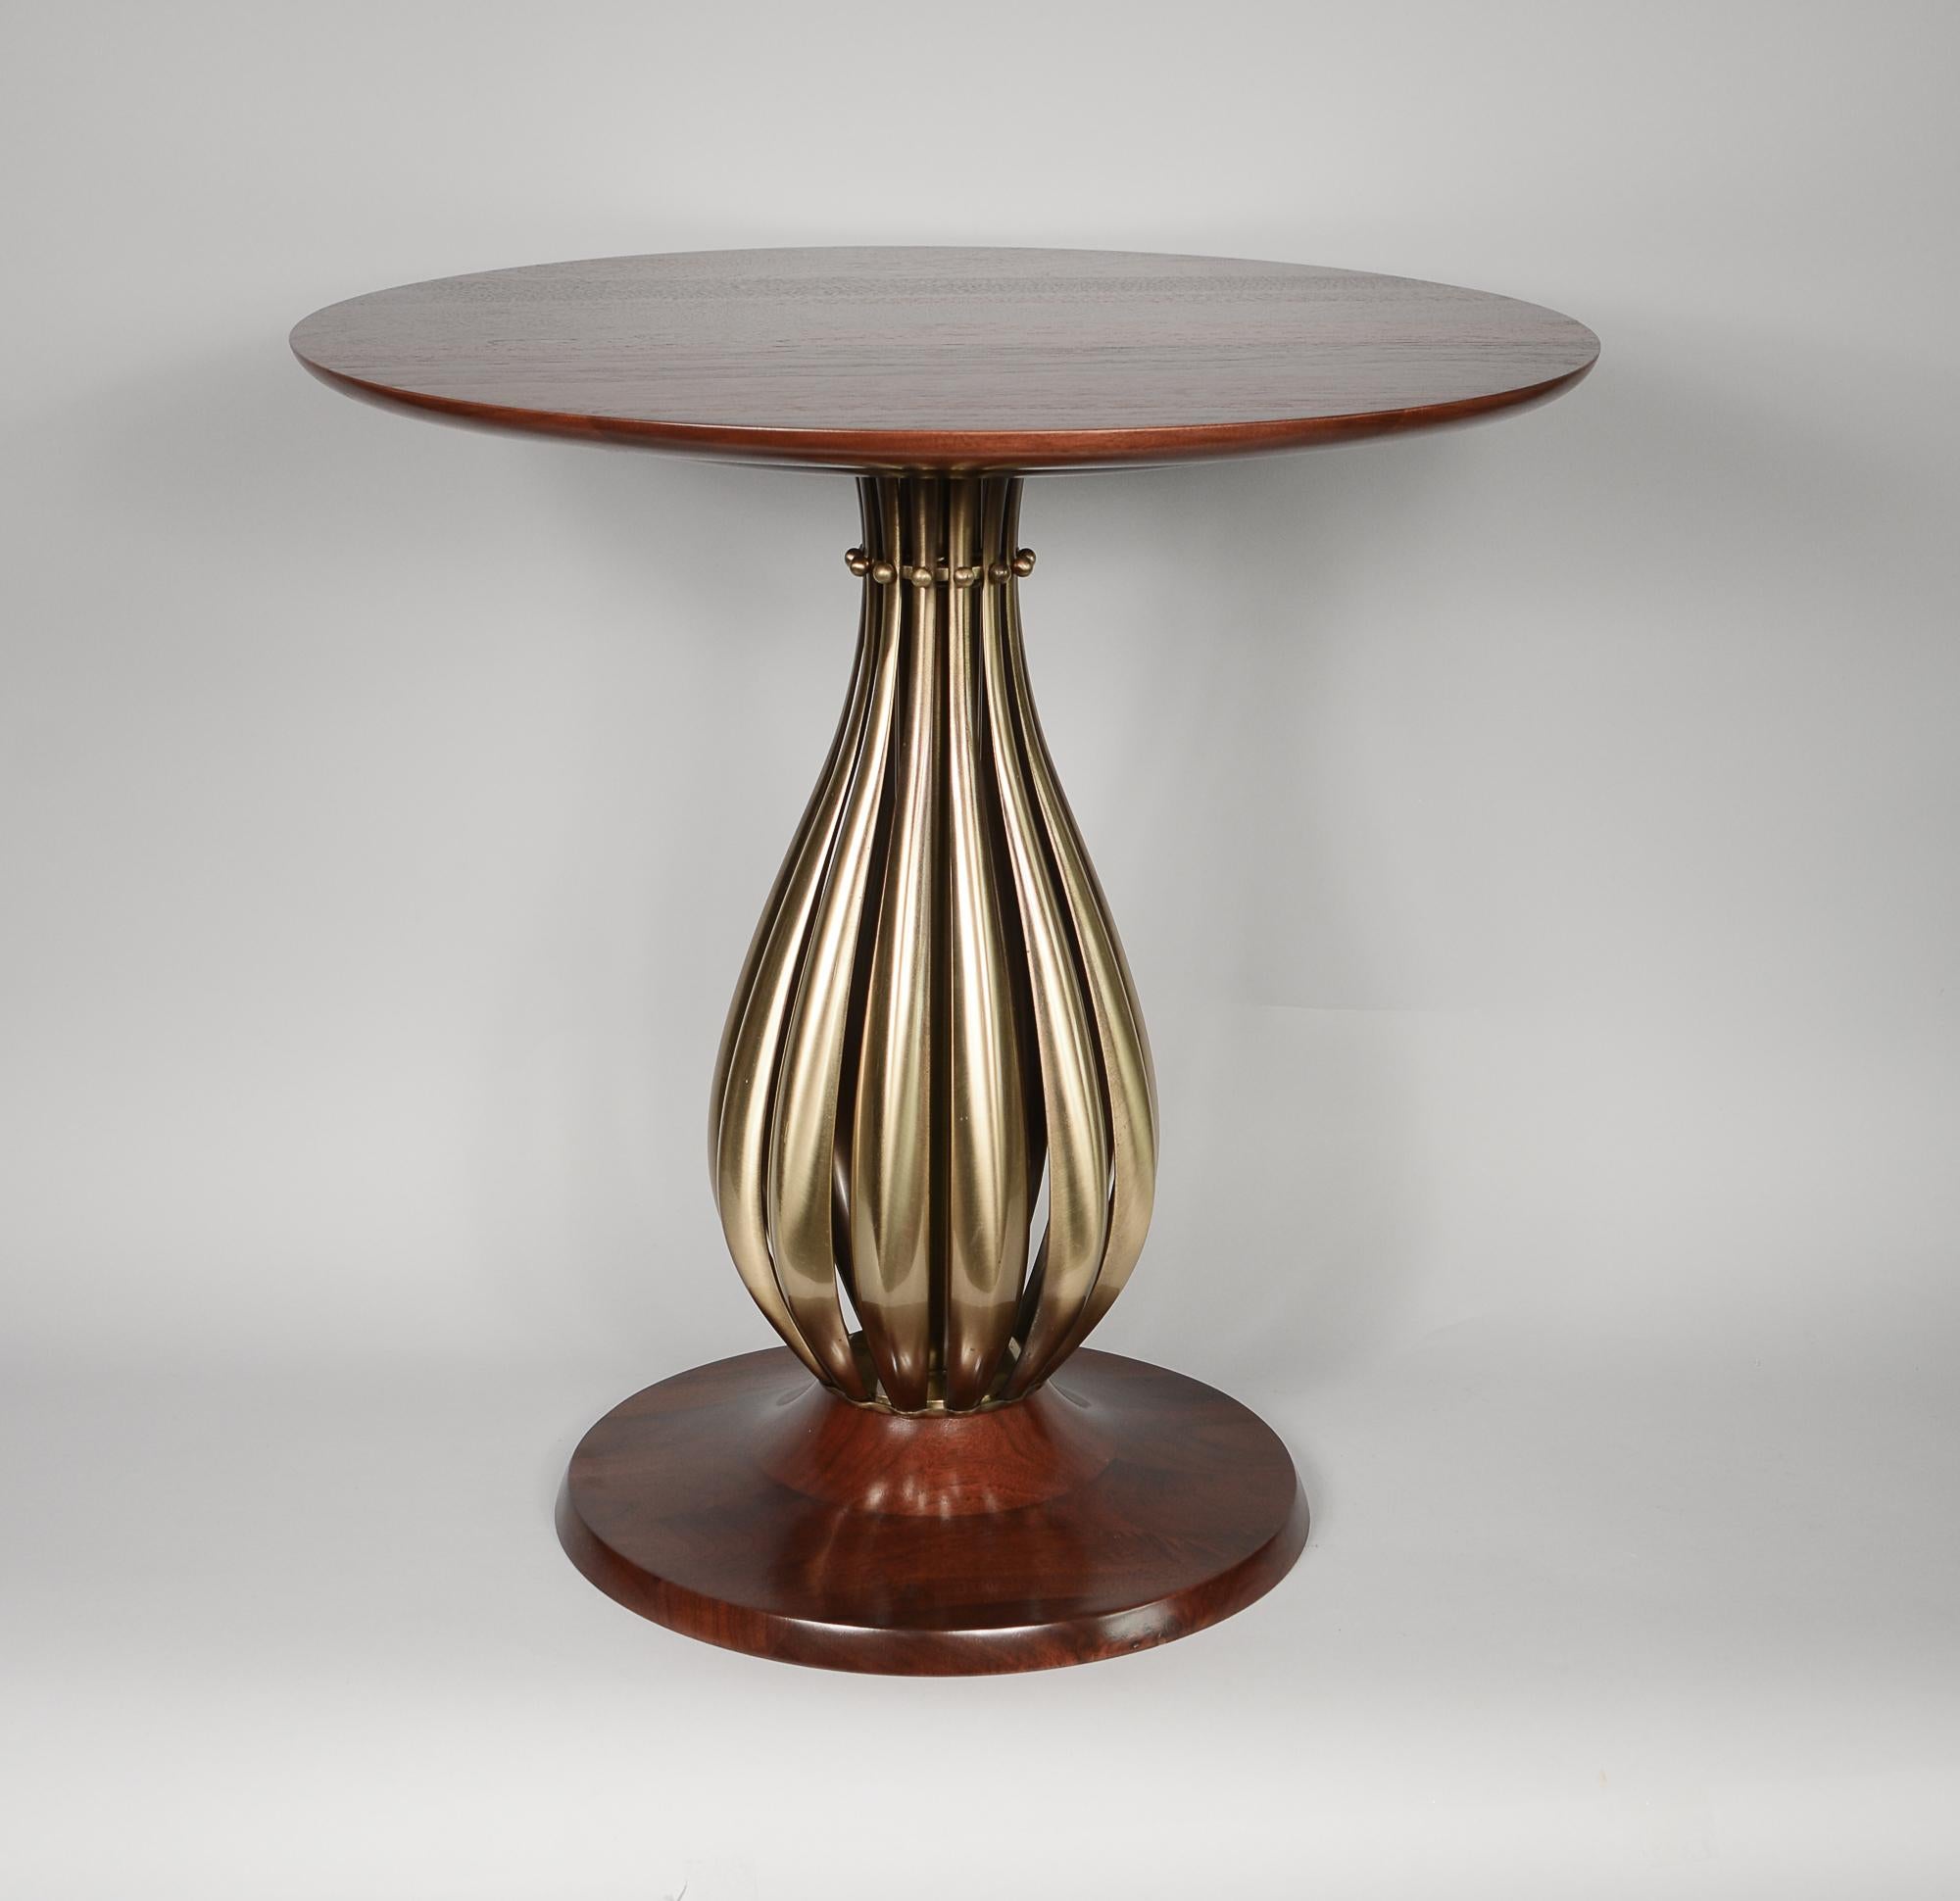 Side table in brass and walnut by the Rembrandt Lamp Company. This has an onion shaped ribbed brass center with solid walnut base and top. This was offered as a floor lamp as well. The lamp pole extended up through the top in that version. The